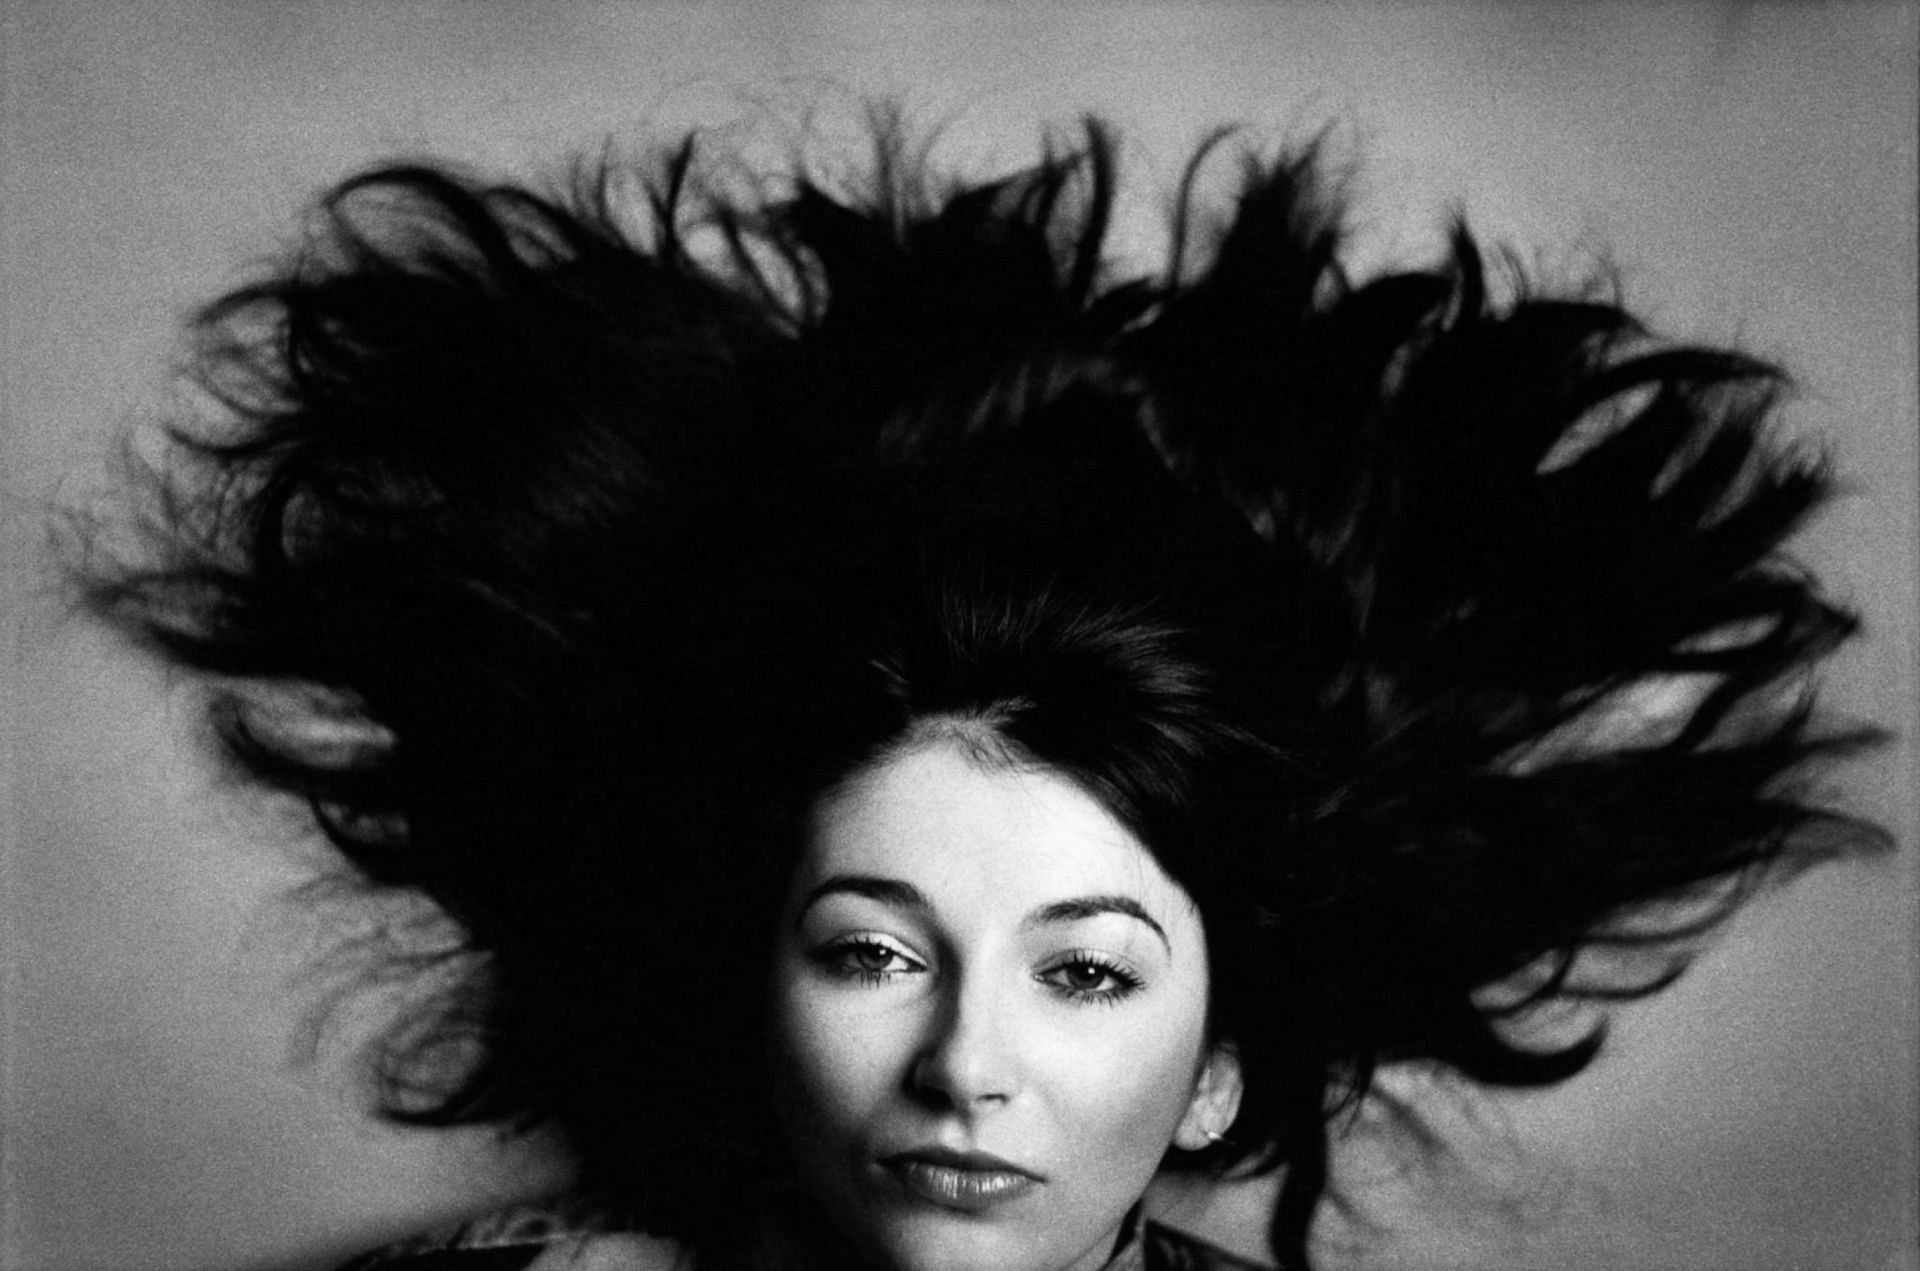 Kate Bush, one of the inductees in Rock and Roll Hall of Fame 2023 list,  is photographed for NME magazine on October 13, 1982 in London, England(Image via Getty Images)